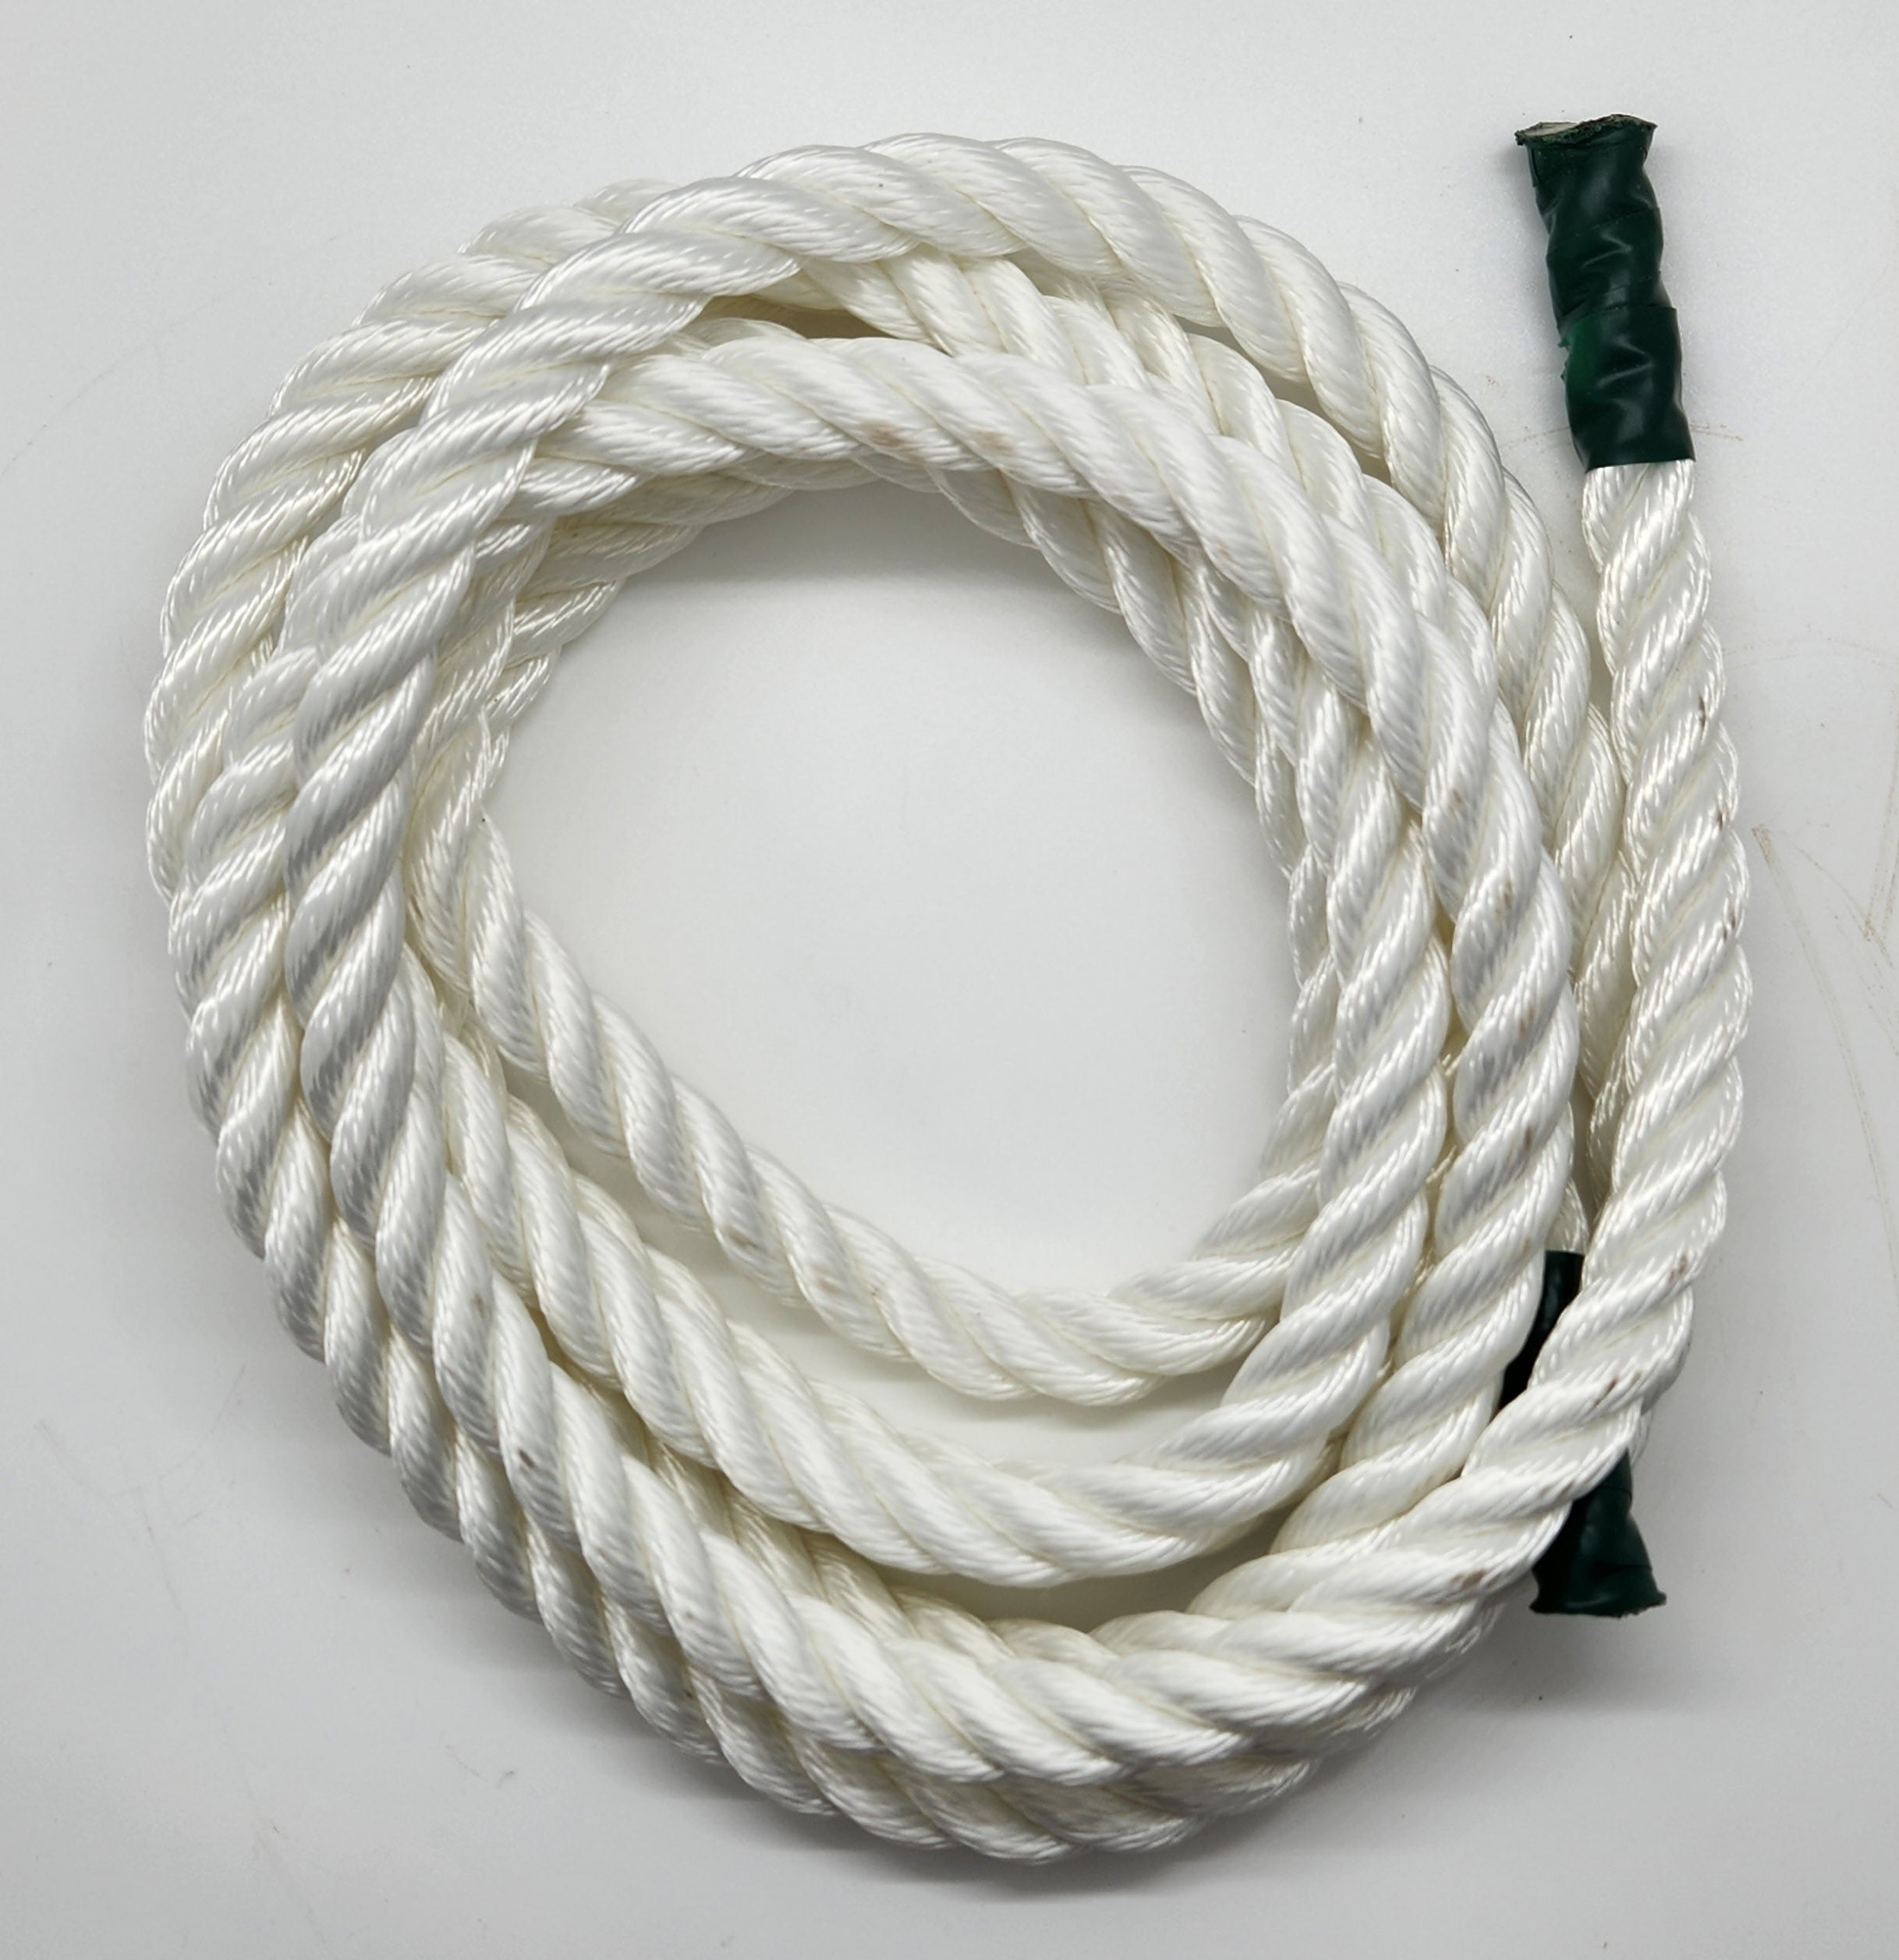 Rear Belly Rope